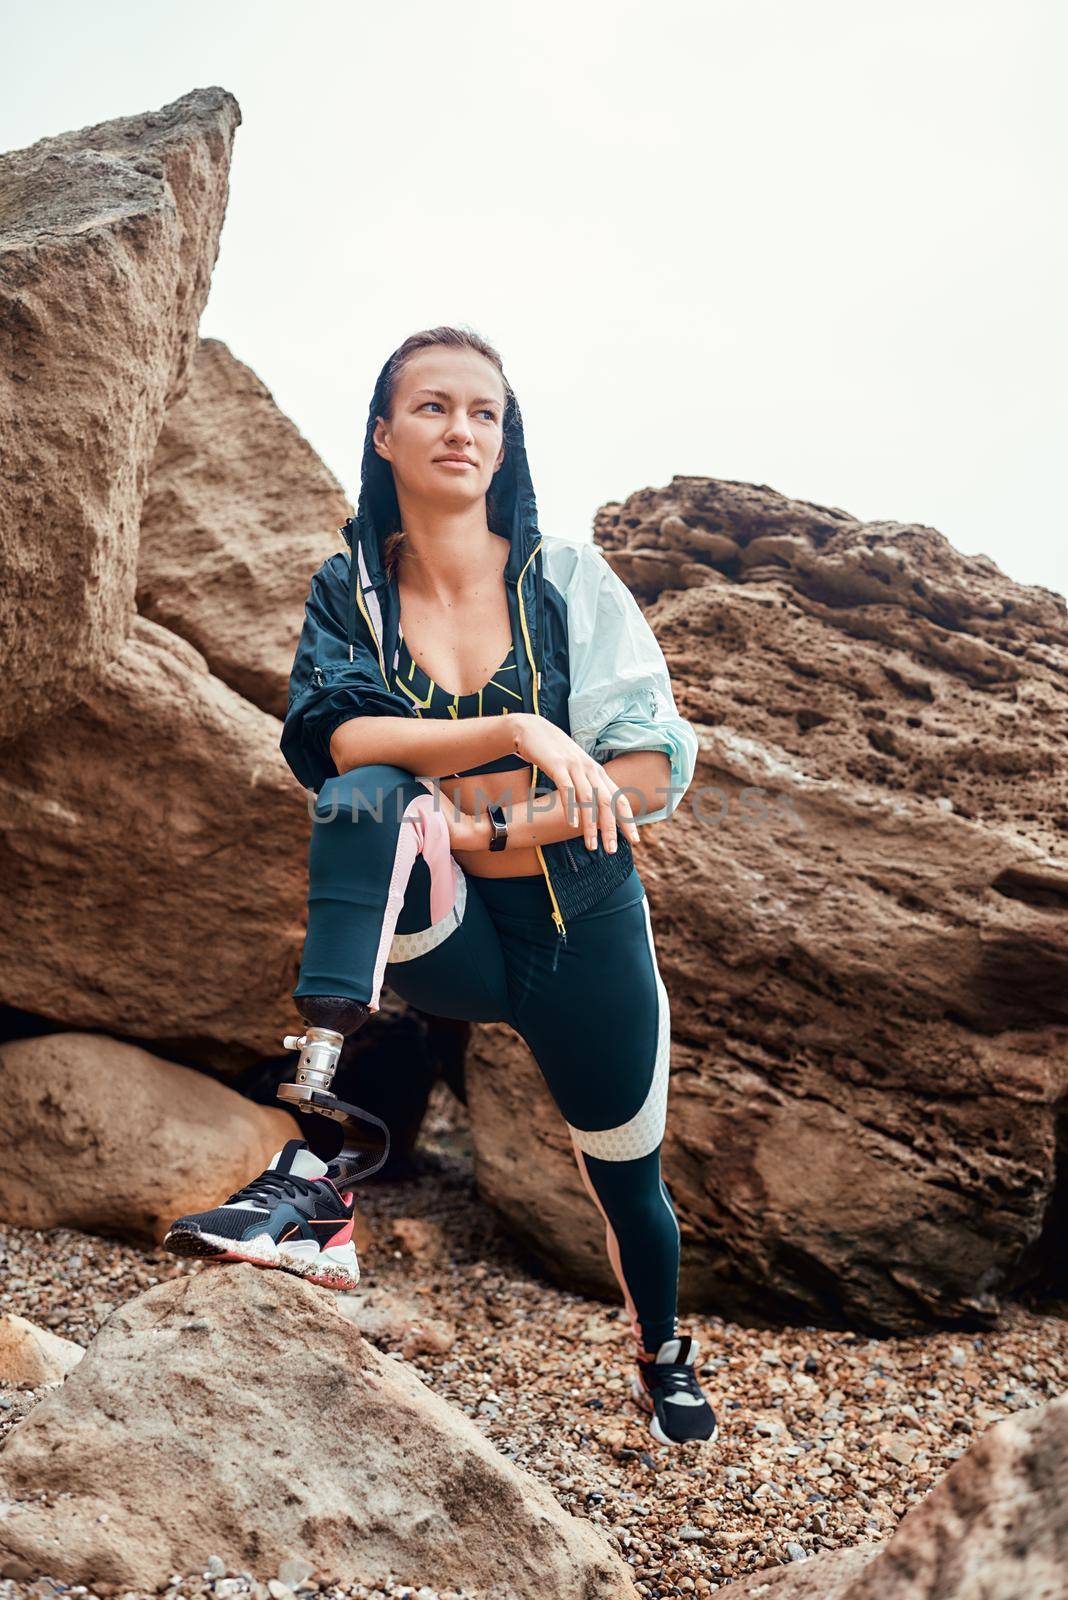 After workout. Vertical photo of disabled athlete woman in sportswear with prosthetic leg standing on the beach and looking at camera. Sport concept. Sport outside. Disabled Sportsman.